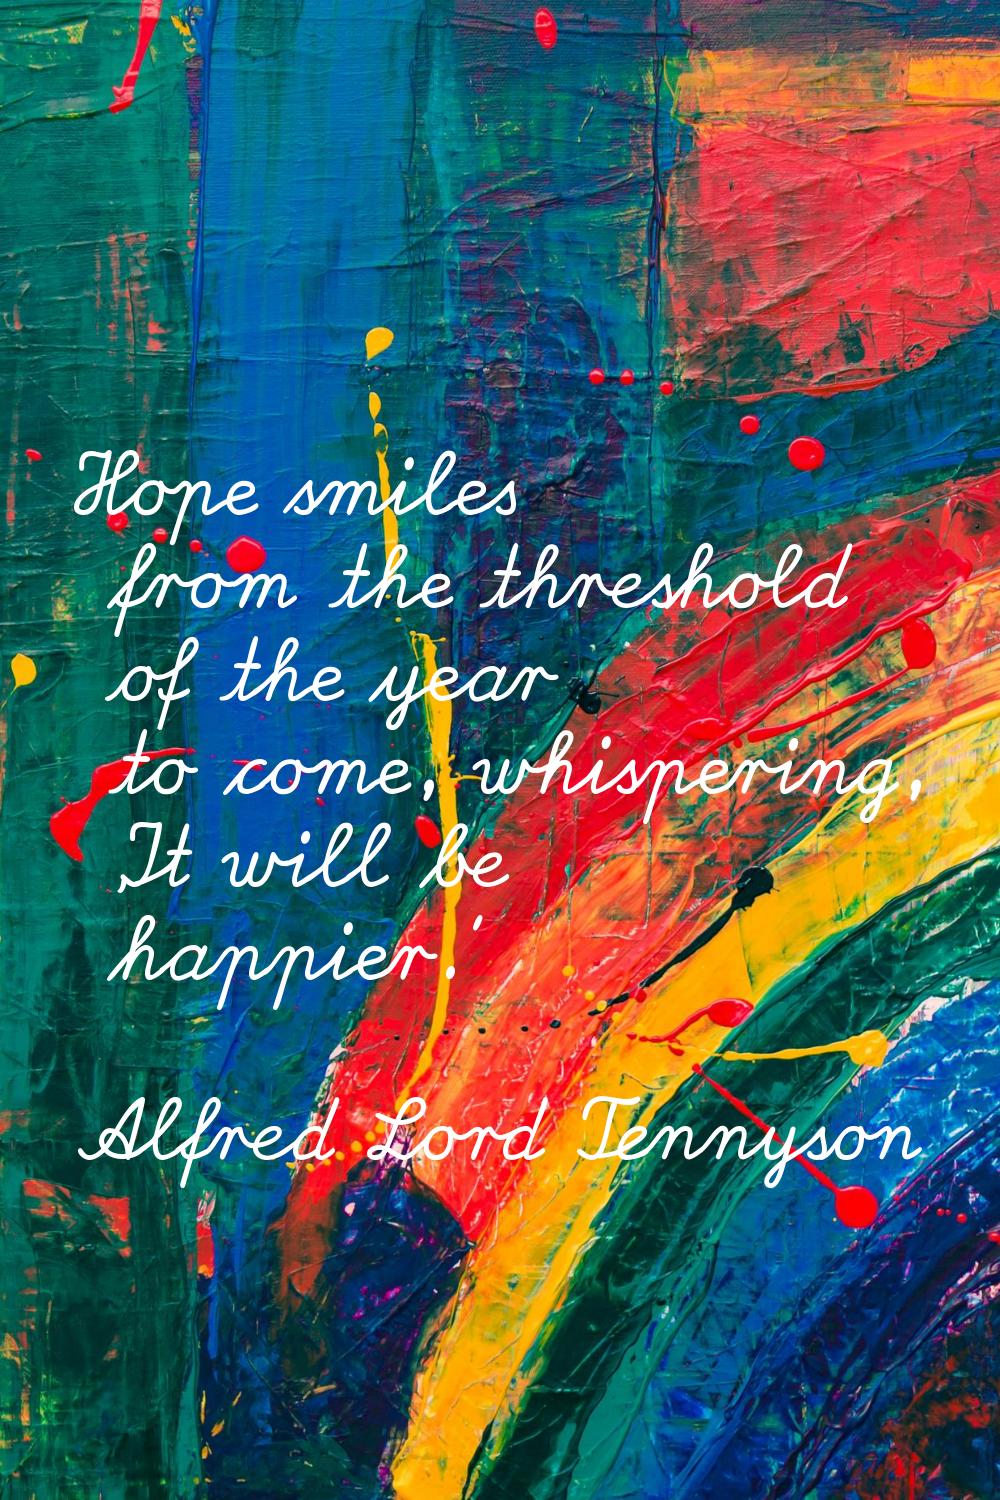 Hope smiles from the threshold of the year to come, whispering, 'It will be happier.'